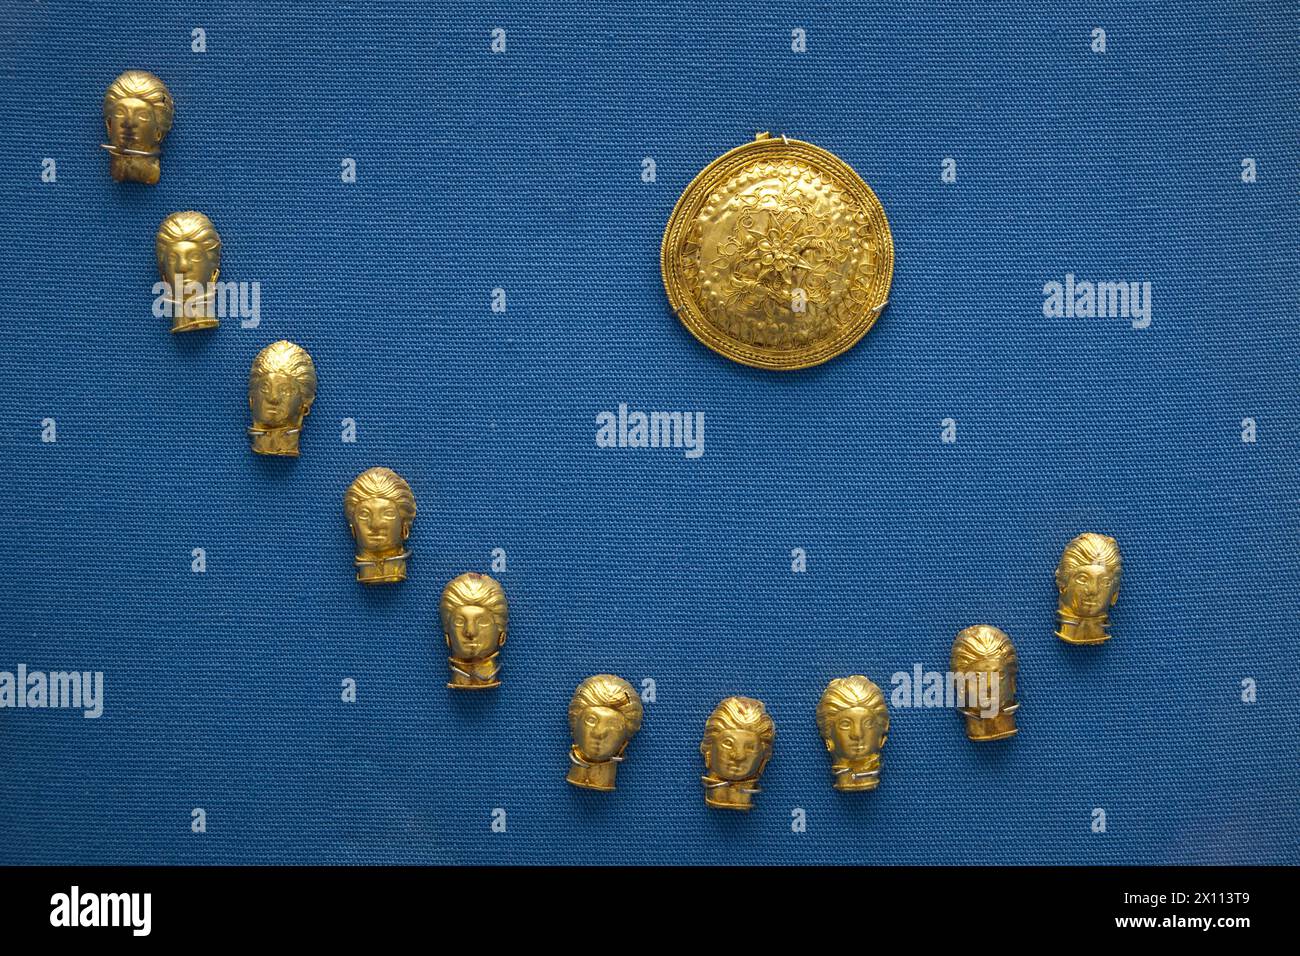 Circular gold brooch with filagree decoration Ten gold pendants in the form of female heads Made in southern Italy about 340-300BC Stock Photo